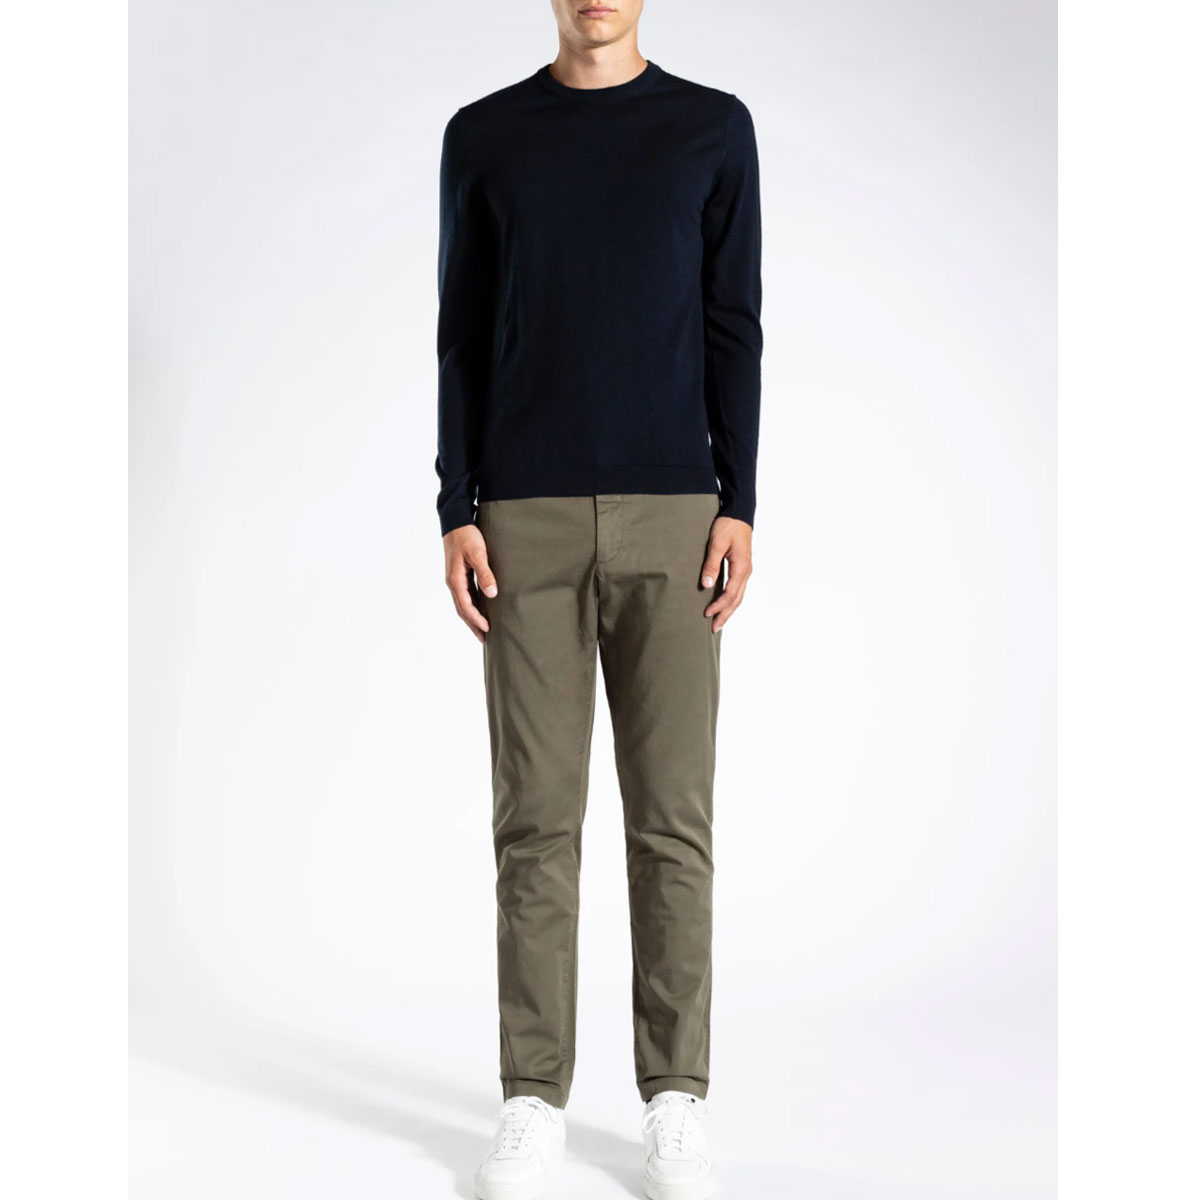 NORSE PROJECTS Pantalon AROS light stretch Ivy green